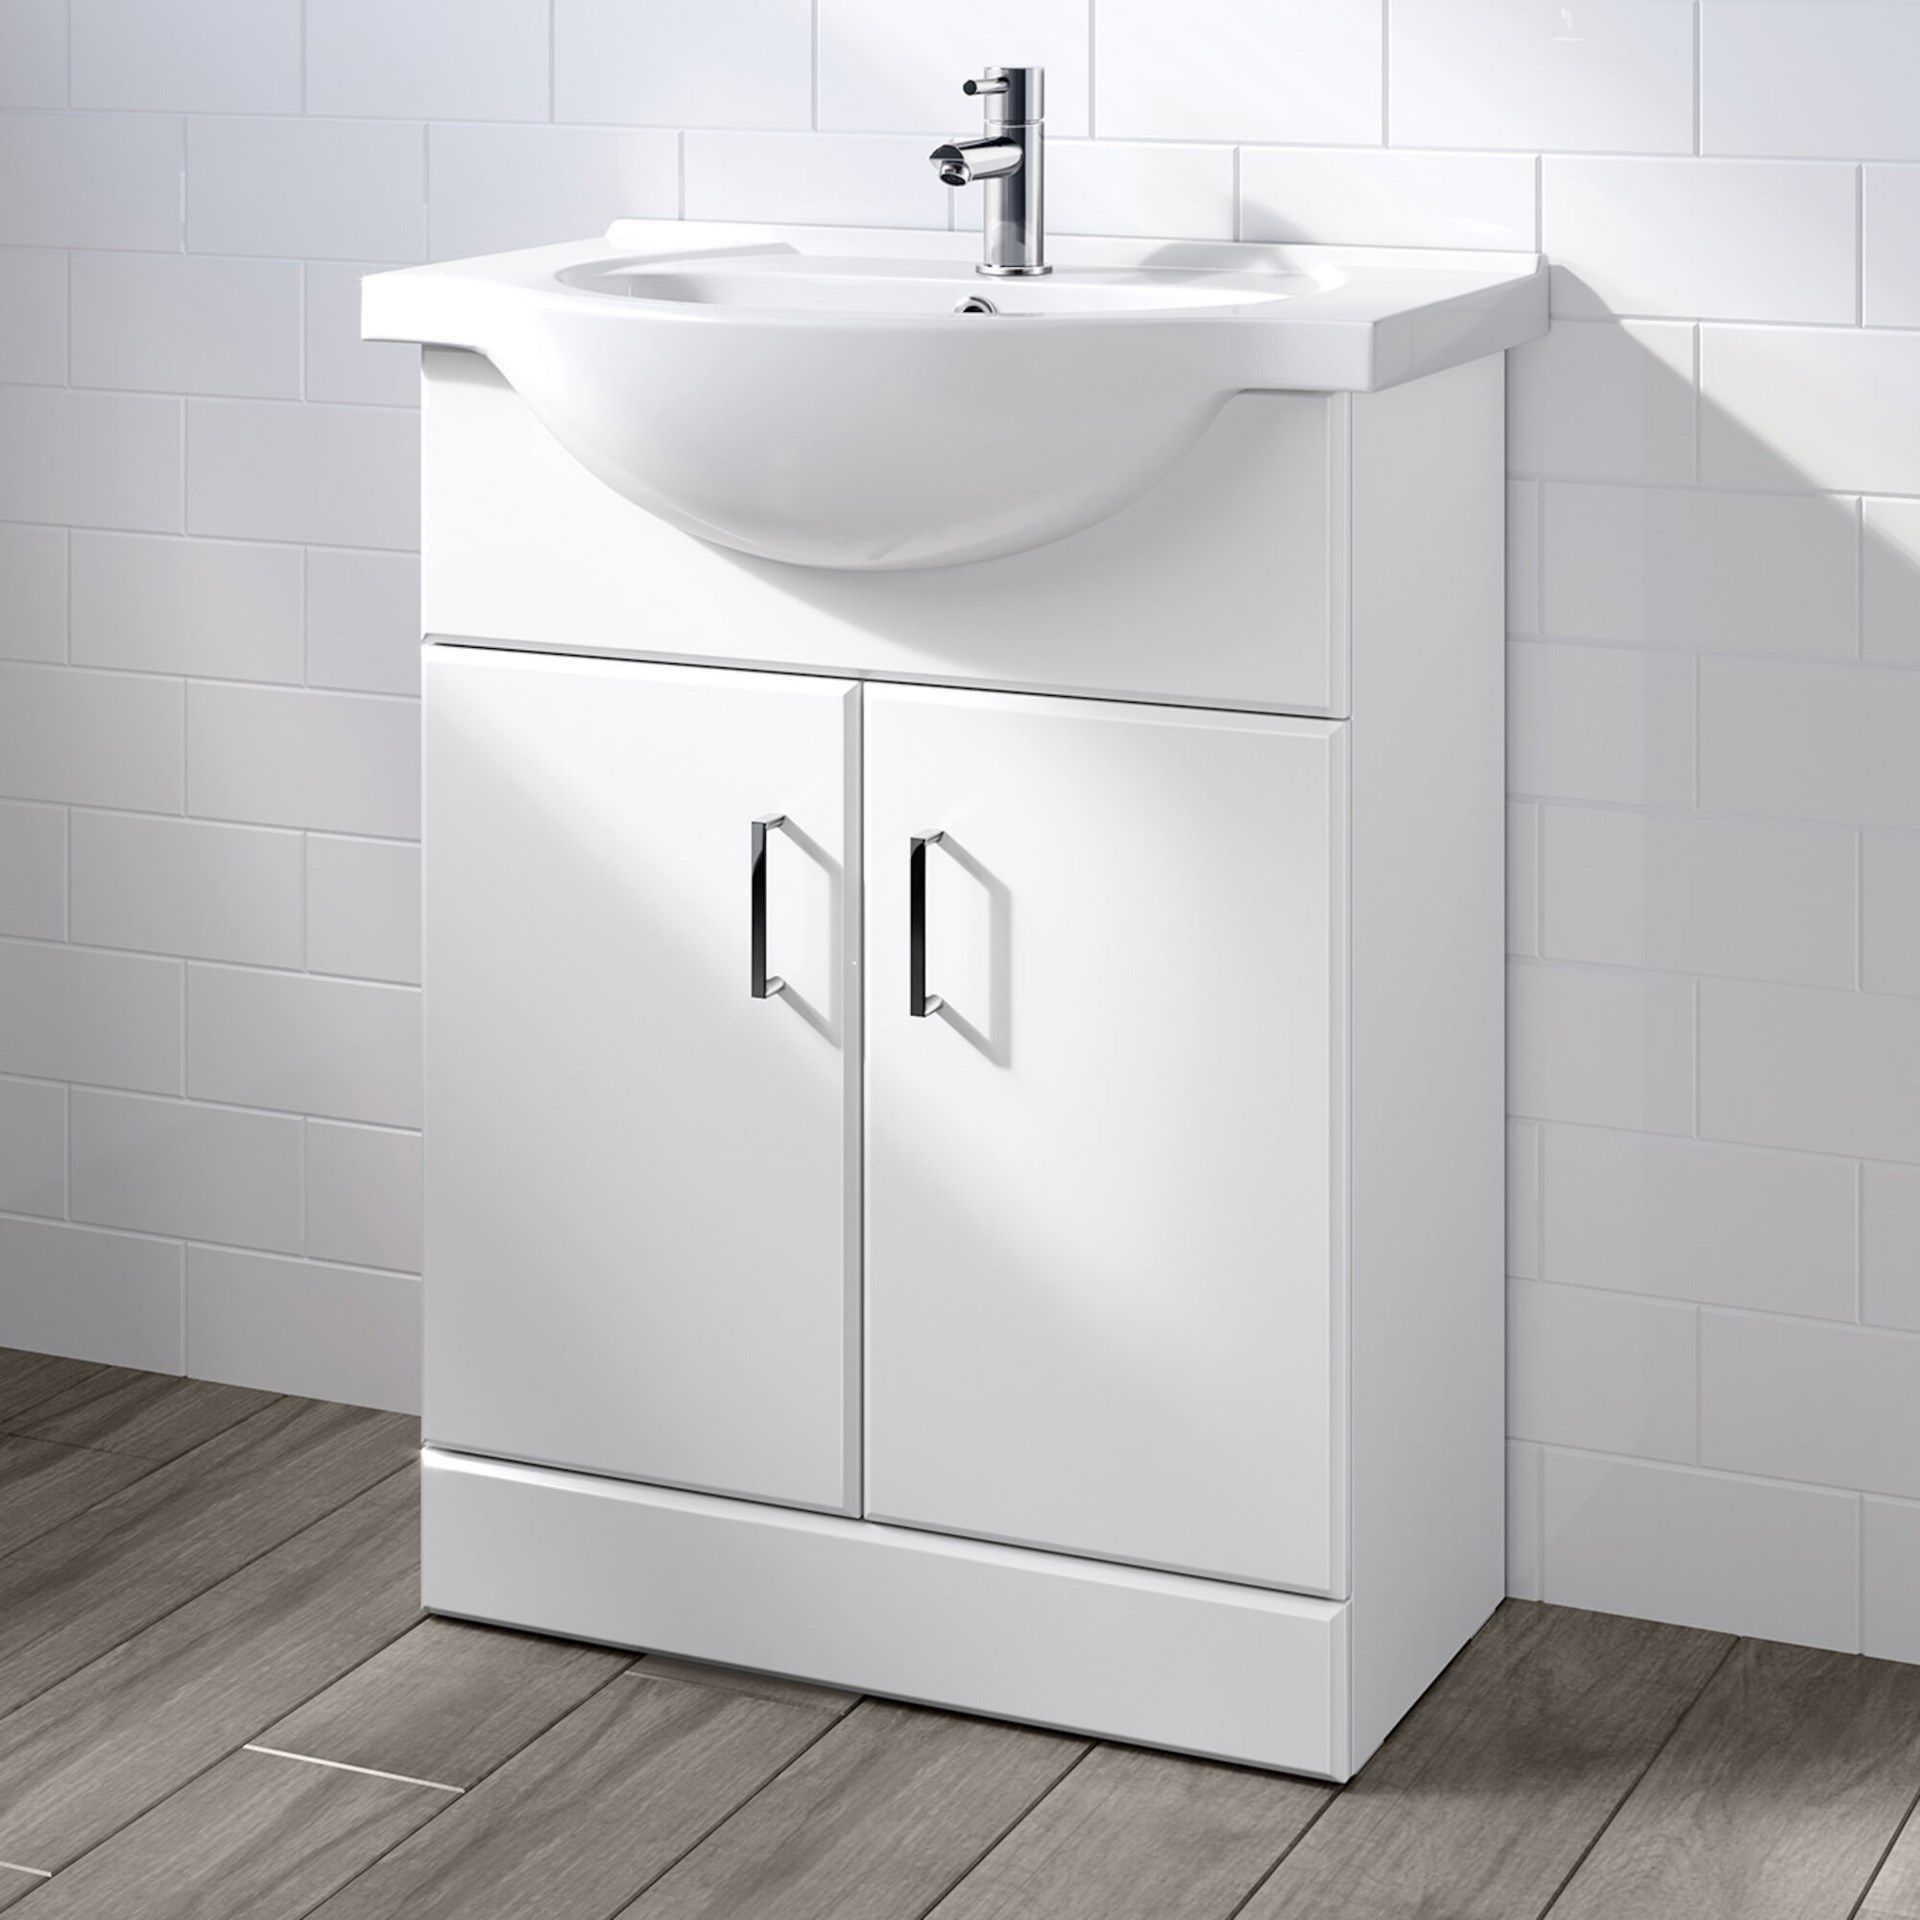 New (U104) 550mm Lanzo Gloss White Built In Basin Cabinet. Rrp £349.99.Comes Complete With Ba...